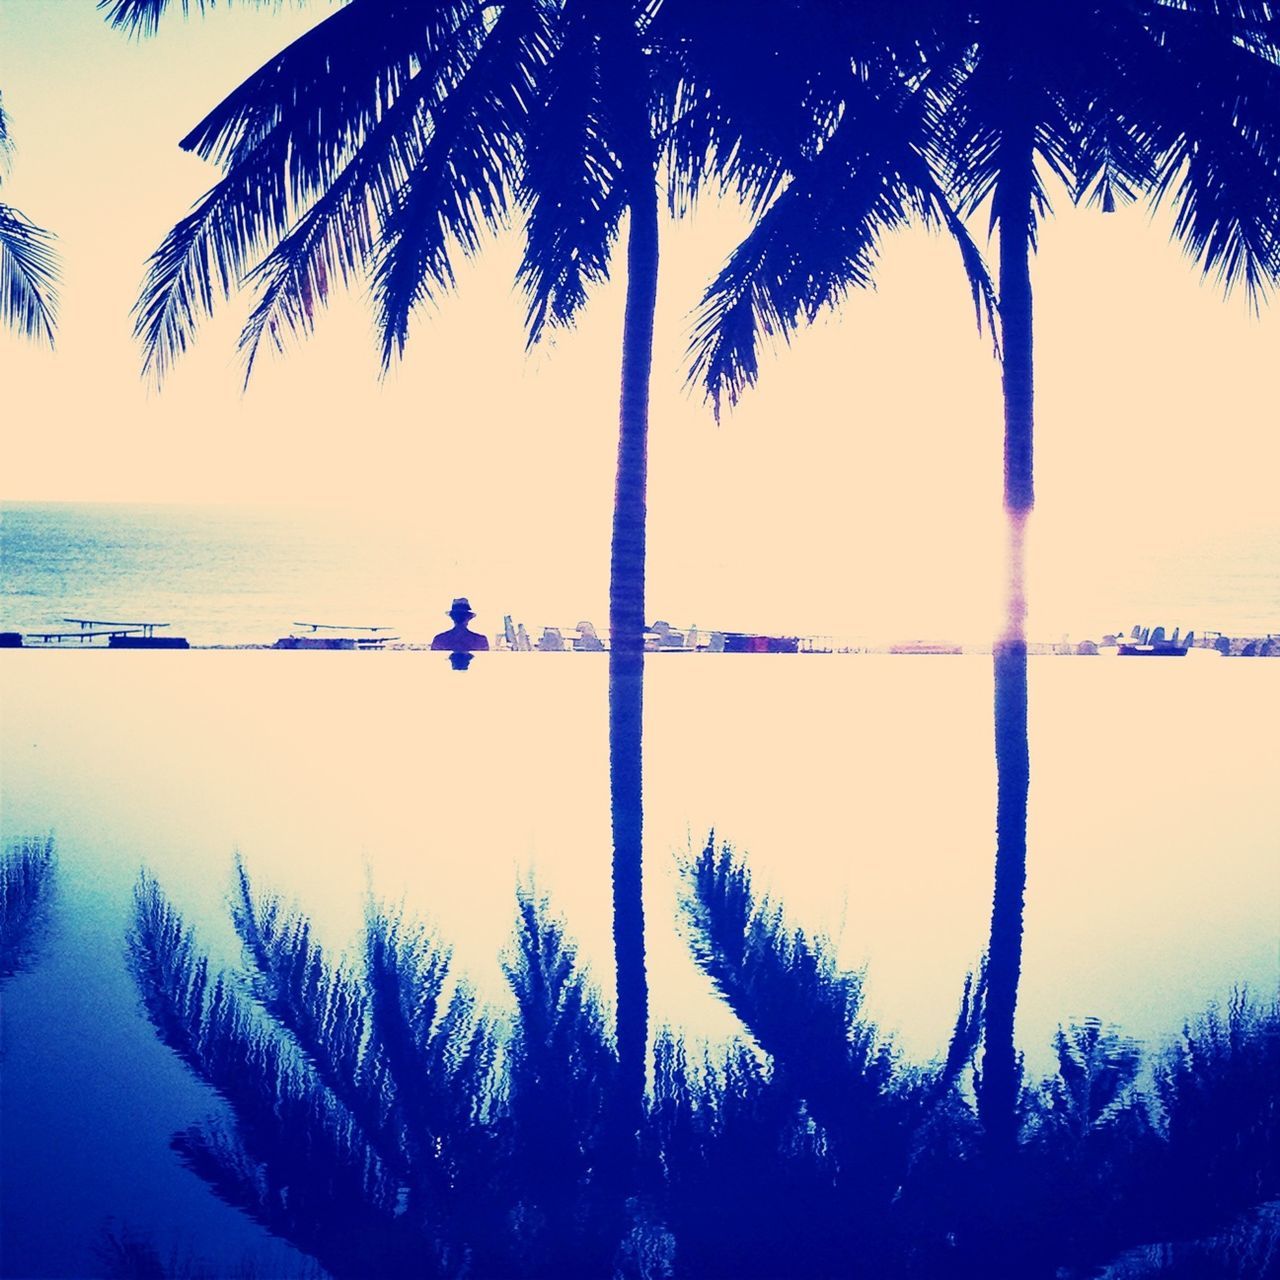 sea, water, palm tree, tree, clear sky, horizon over water, tranquility, tranquil scene, scenics, blue, beauty in nature, sunset, nature, beach, silhouette, branch, sky, shore, idyllic, dusk